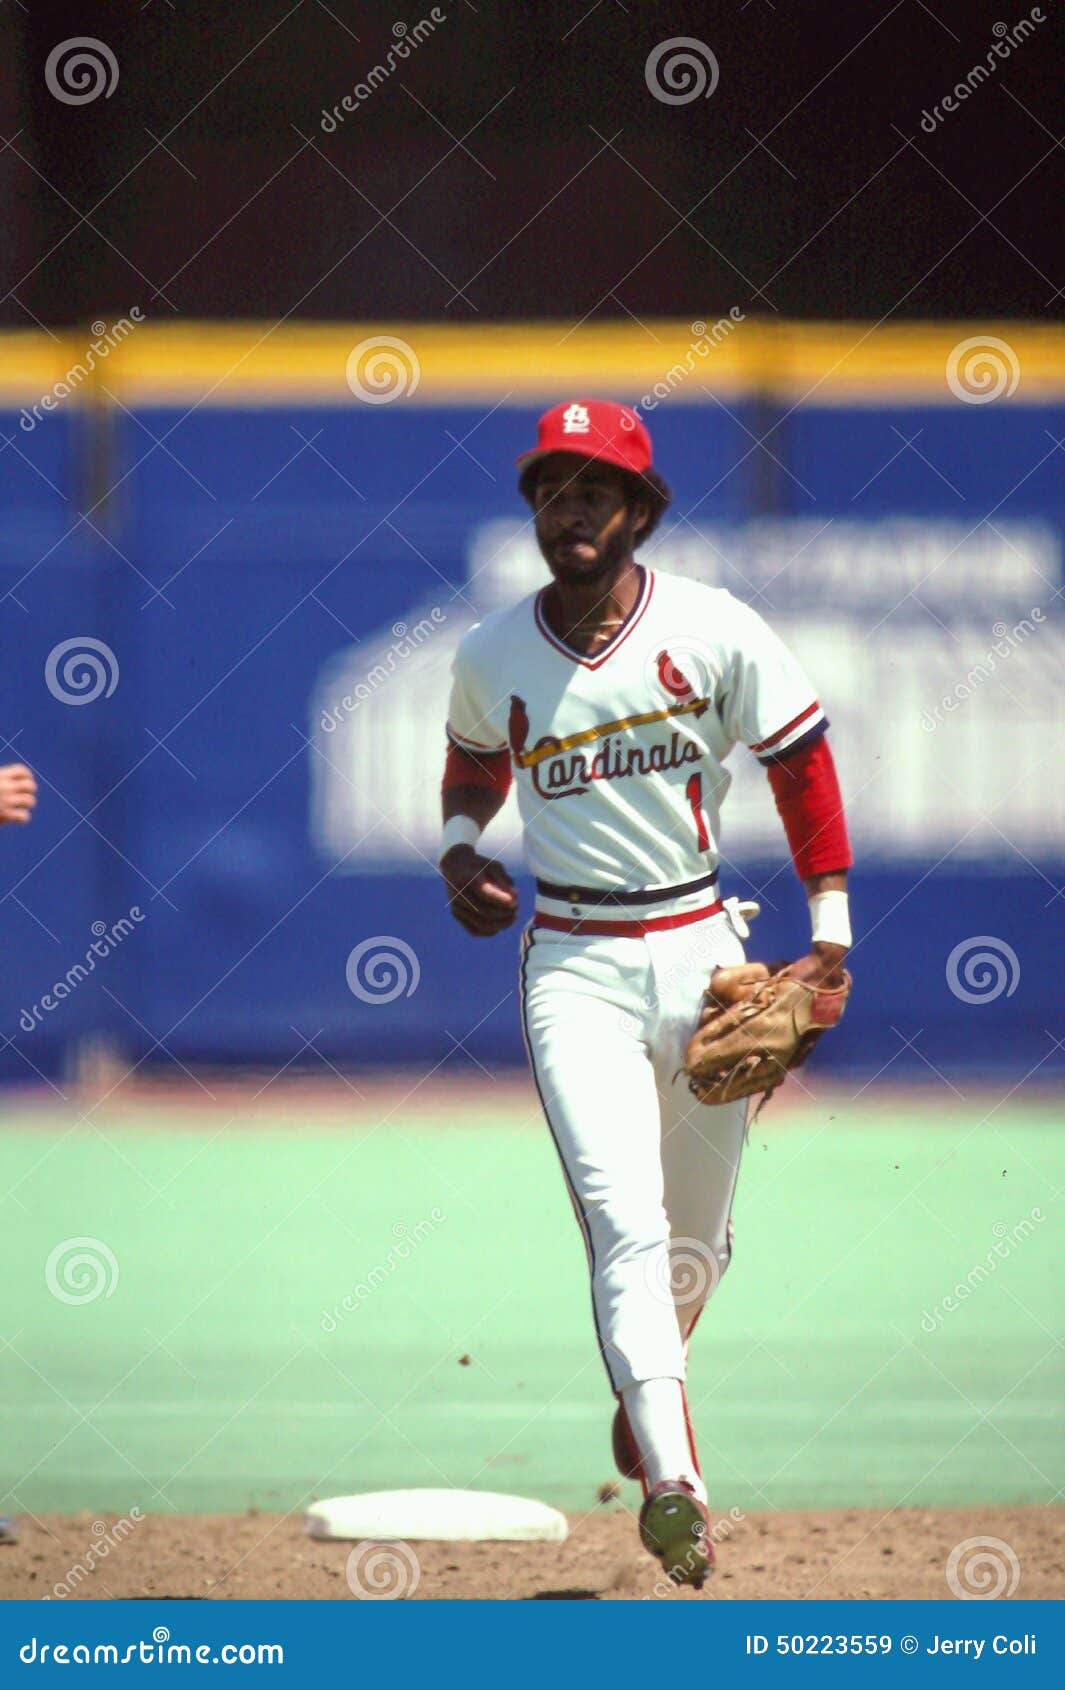 Download Ozzie Smith Photocard Wallpaper